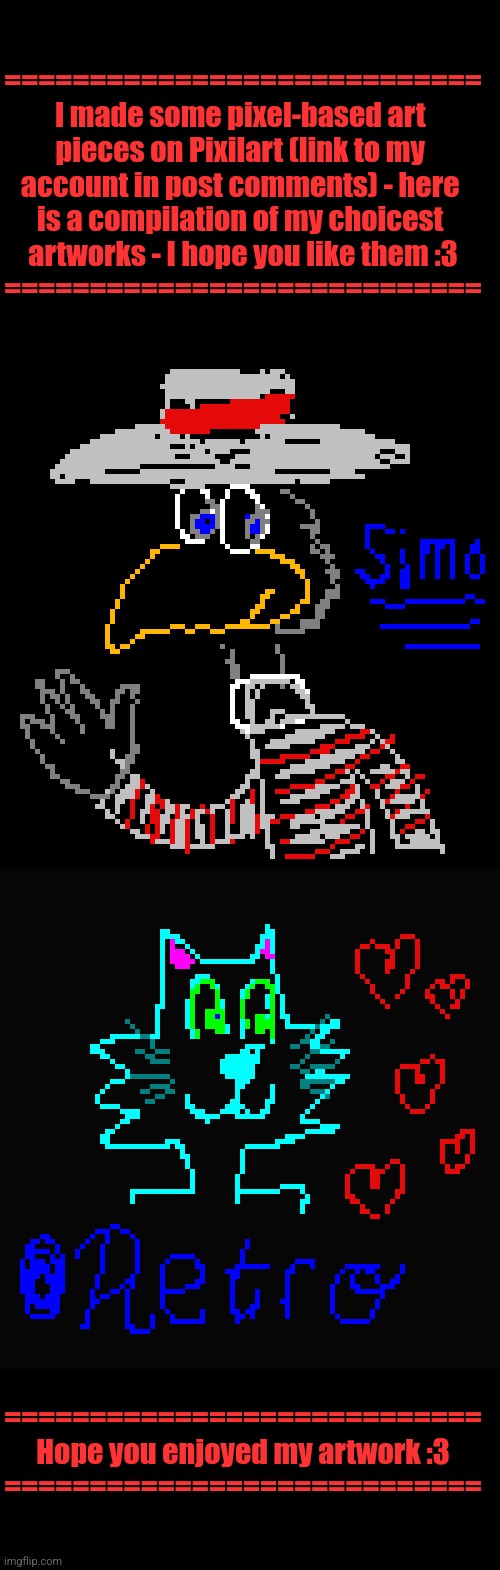 SimoTheFinlandized's Pixilart Artwork Compilation (I Really Hope You Like It :3) | ============================
I made some pixel-based art 
pieces on Pixilart (link to my 
account in post comments) - here 
is a compilation of my choicest 
artworks - I hope you like them :3
============================; ============================
Hope you enjoyed my artwork :3
============================ | image tagged in simothefinlandized,furry,art,pixel,oc,compilation | made w/ Imgflip meme maker